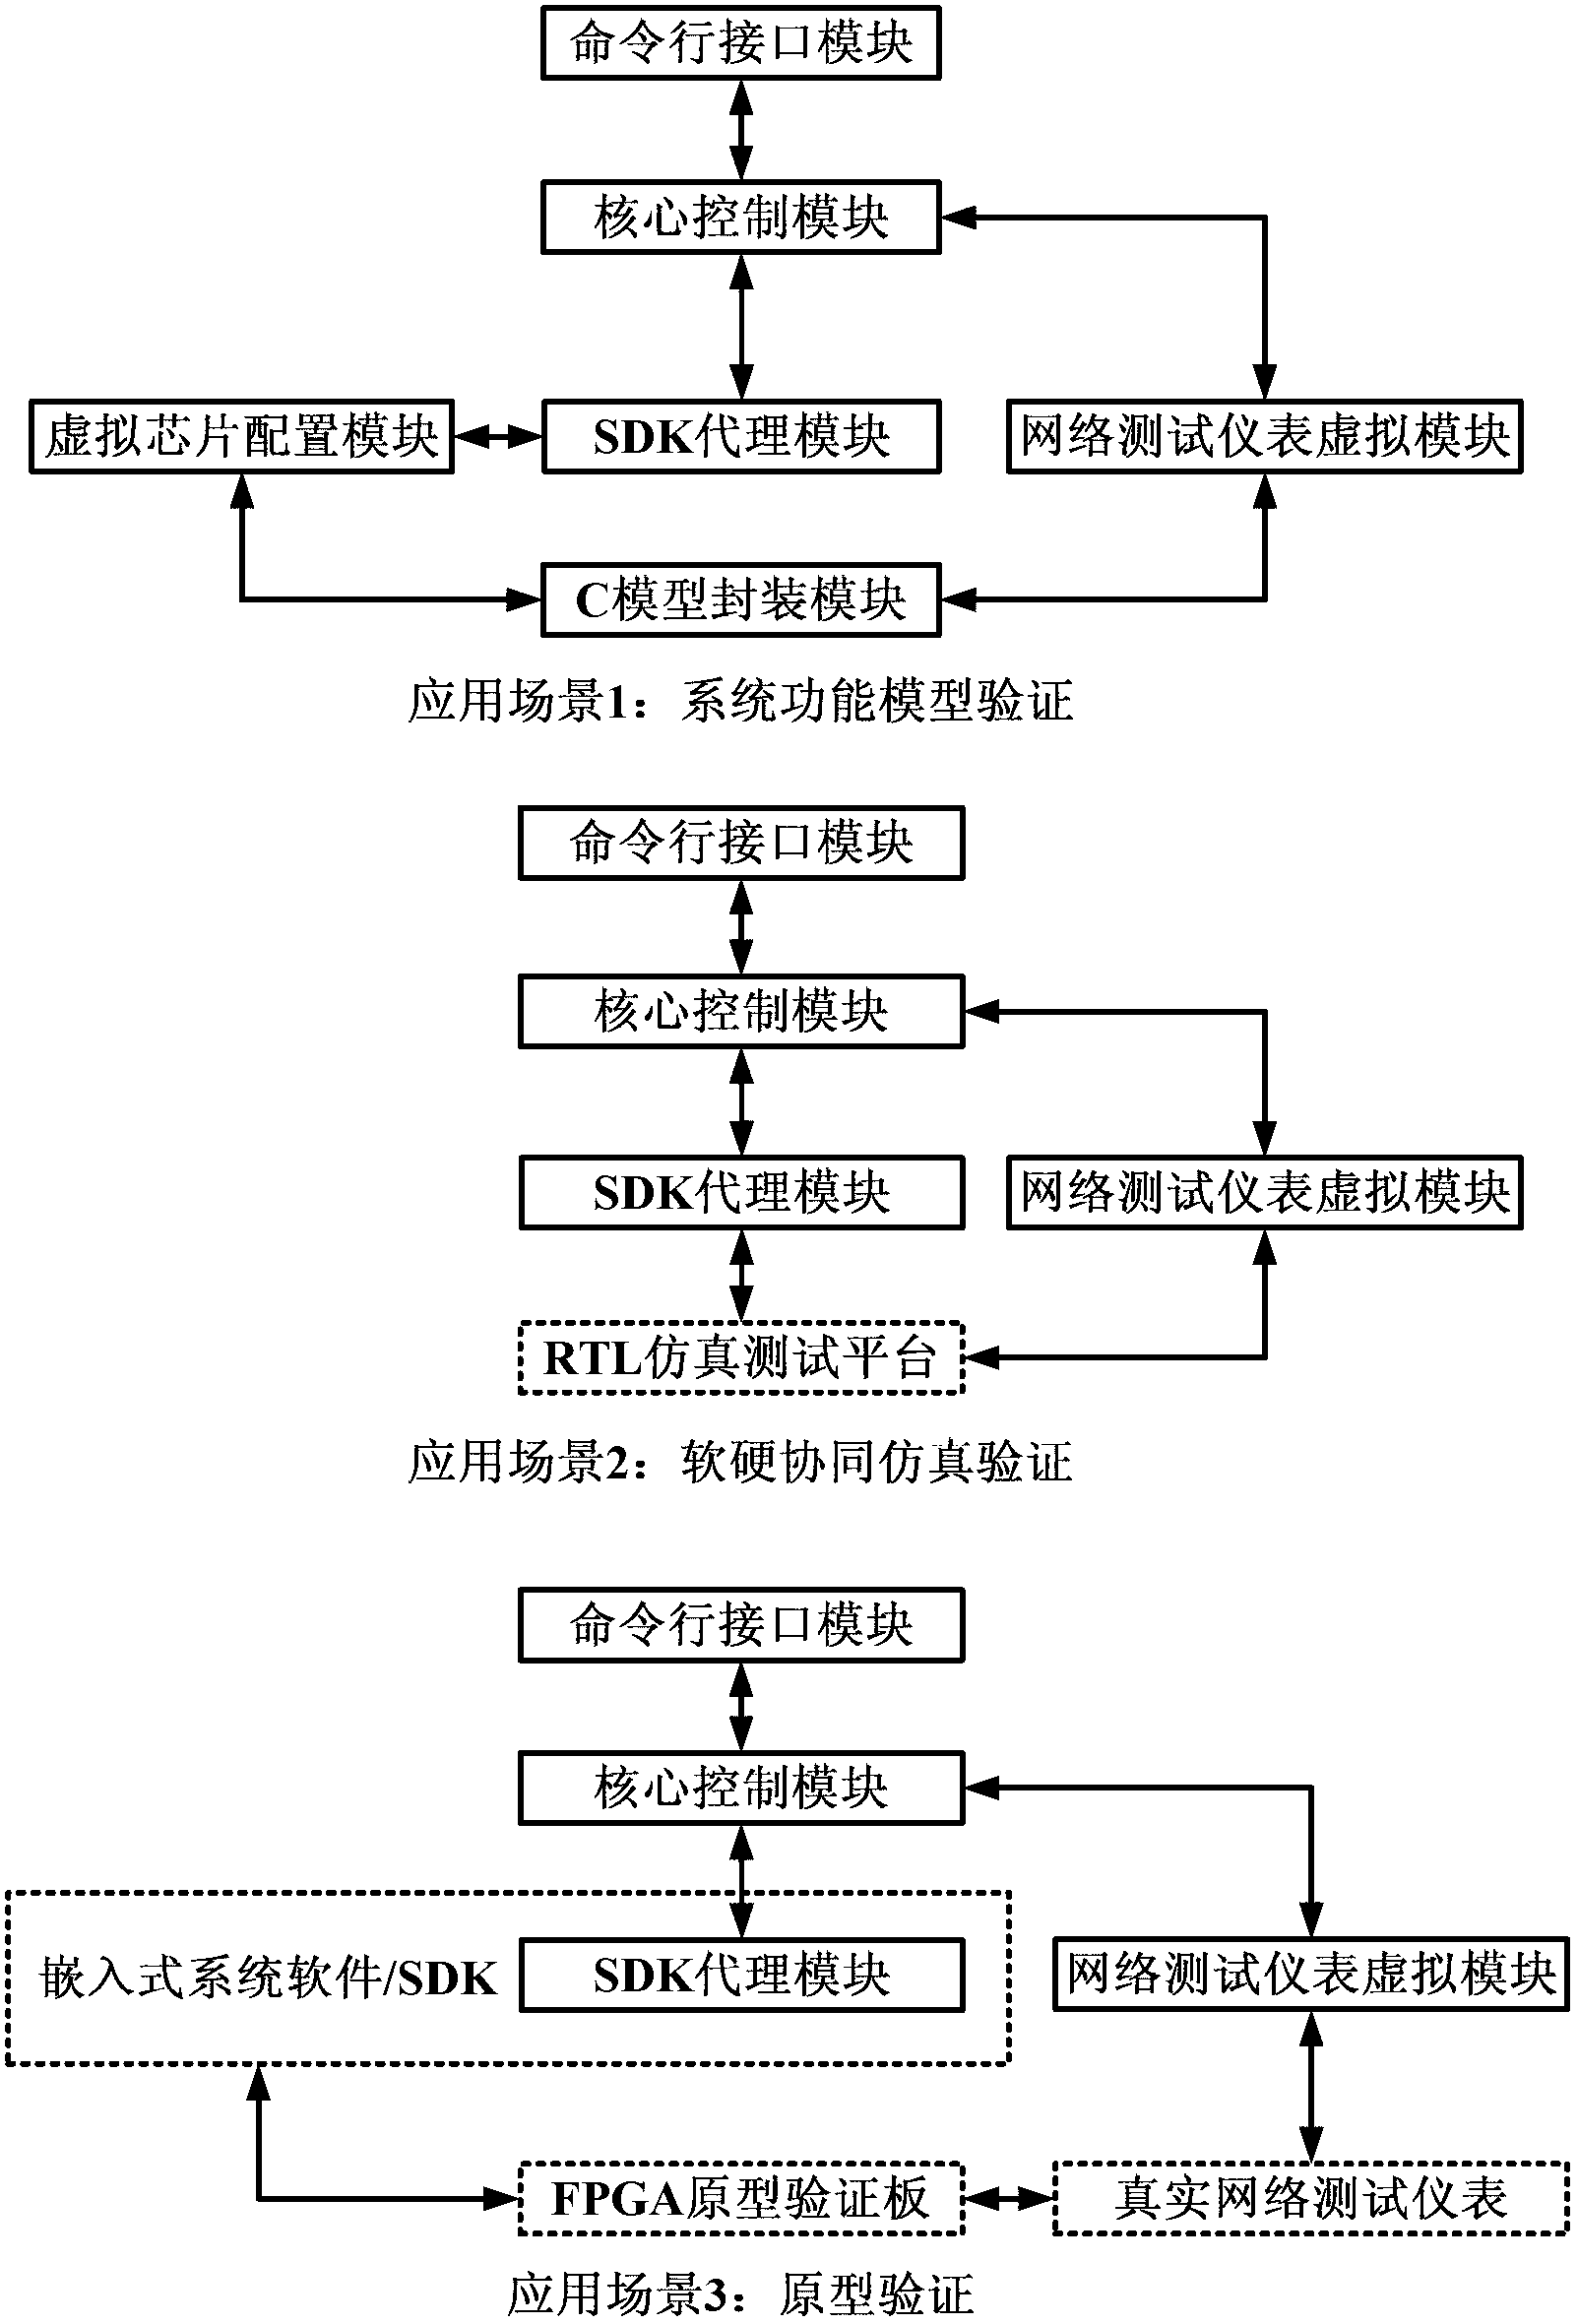 Distributed packet-switching chip model verification system and method